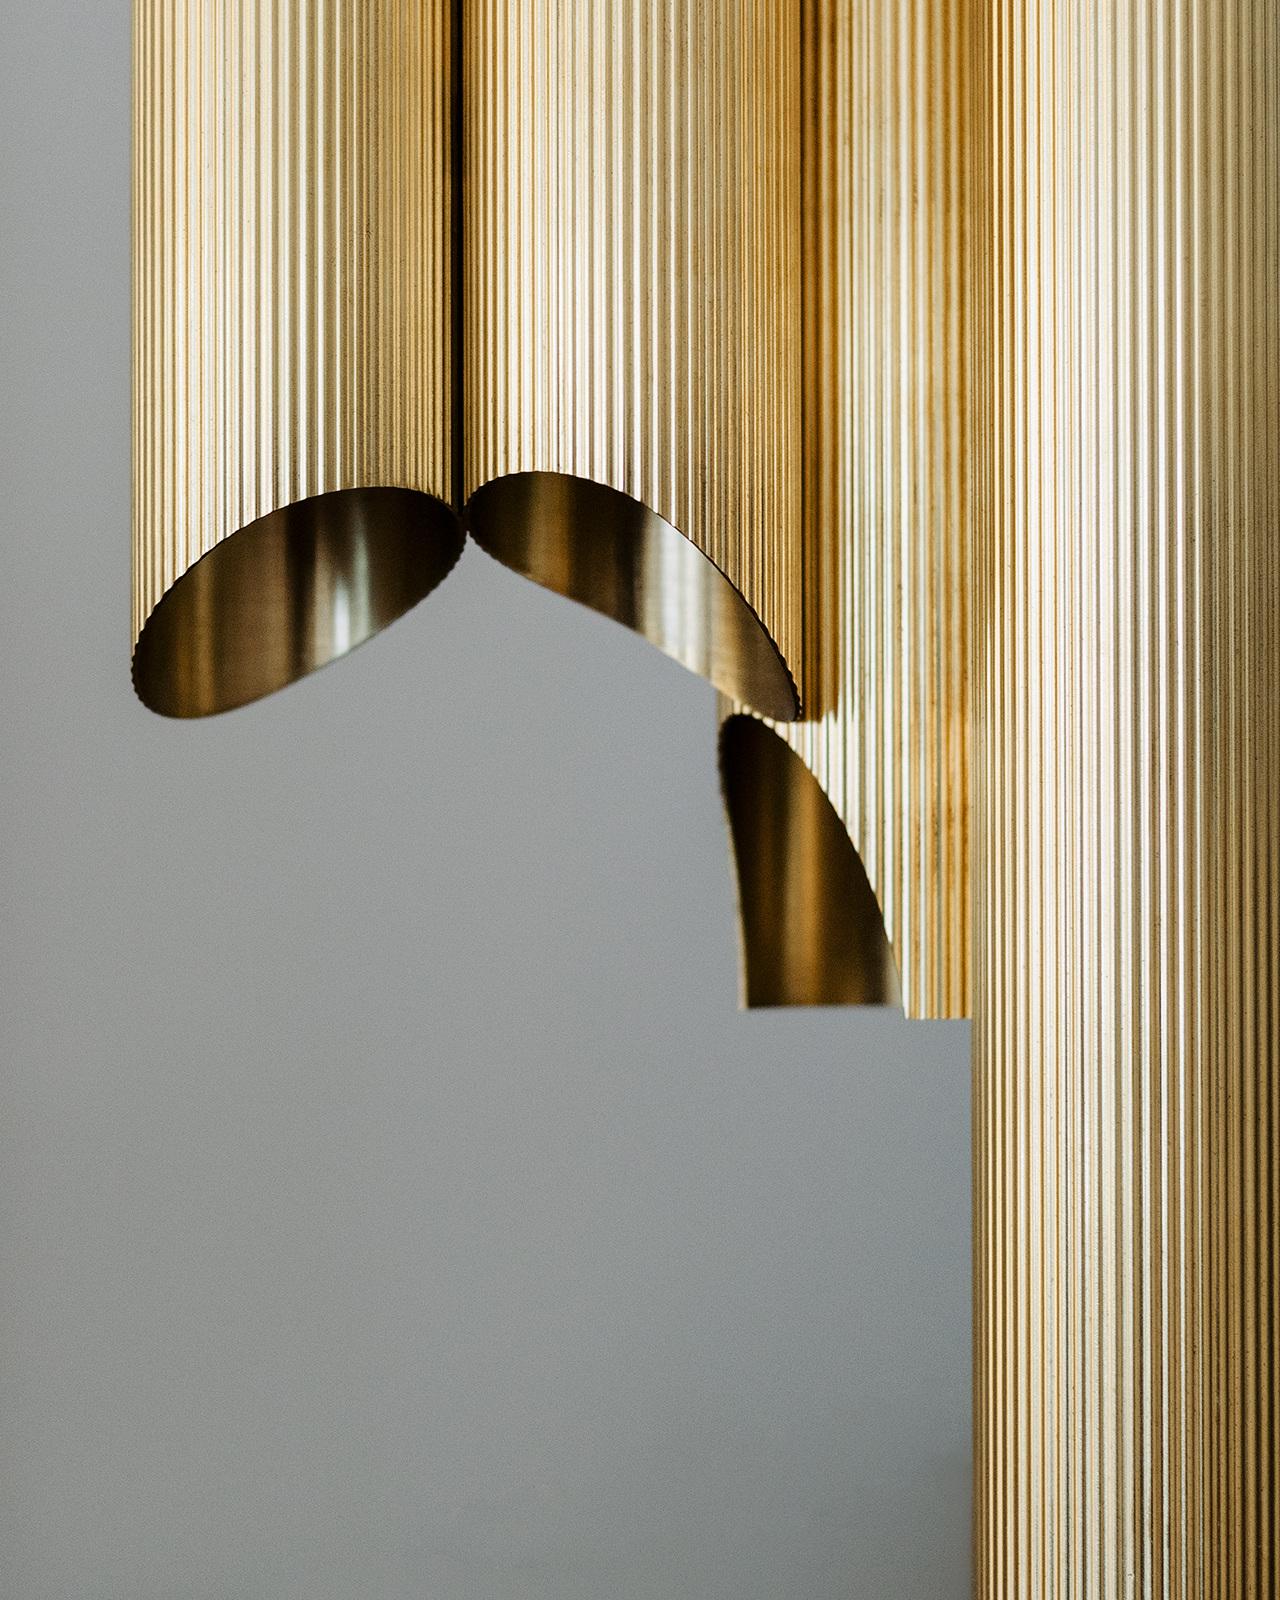 Armilla invites to a relationship with light.
The tubes, like Doric columns, call for a movement around the object, in a mutual exchange between points of view and reflected rays.

We have designed an alphabet of details to bring light through the